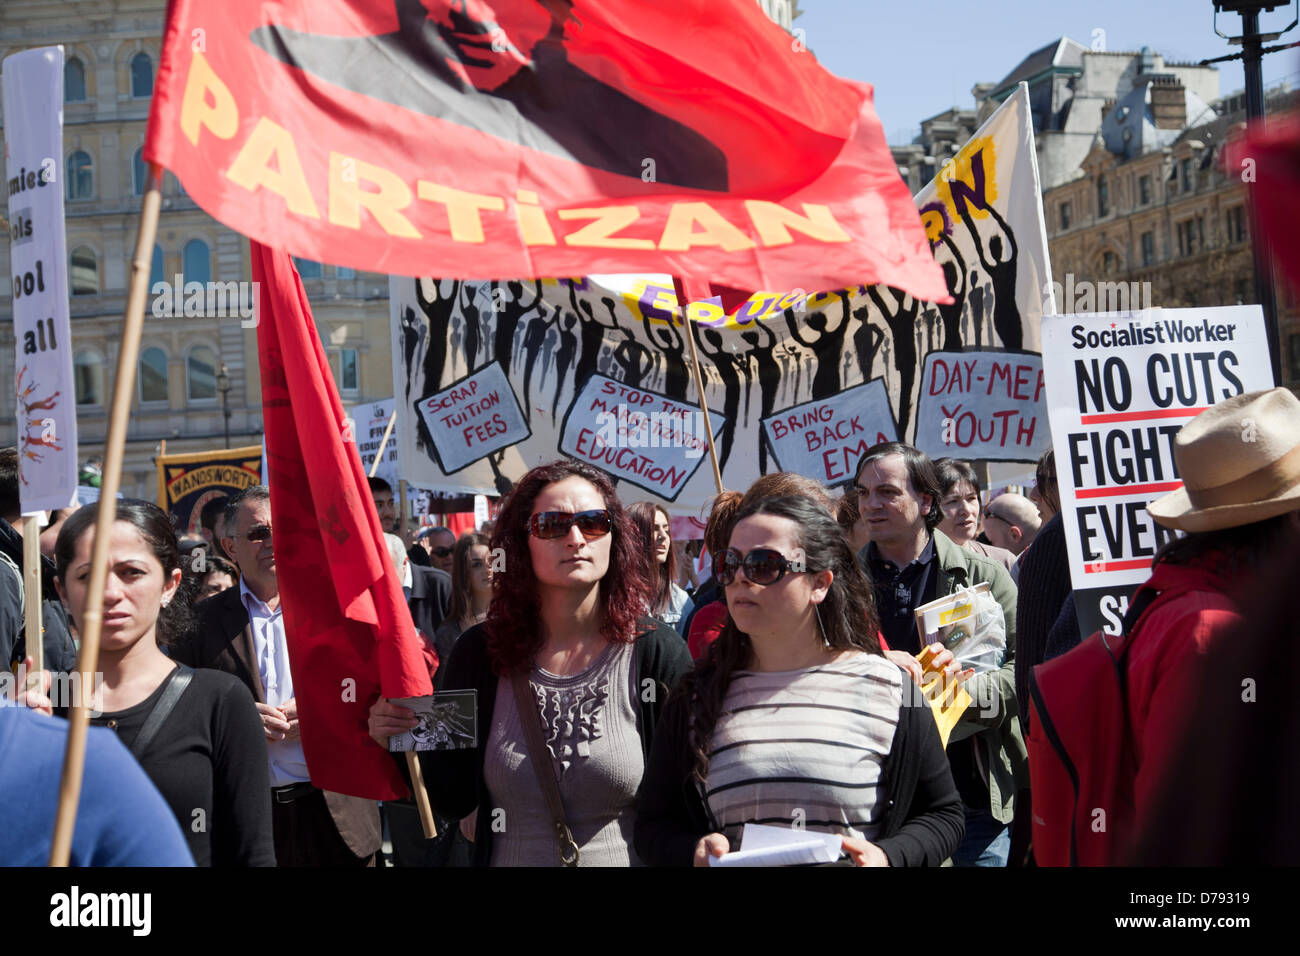 01 May 2013 - 14 .29 pm - May Day Rally Demonstration Takes Place in Trafalgar Square - London - England - UK Stock Photo